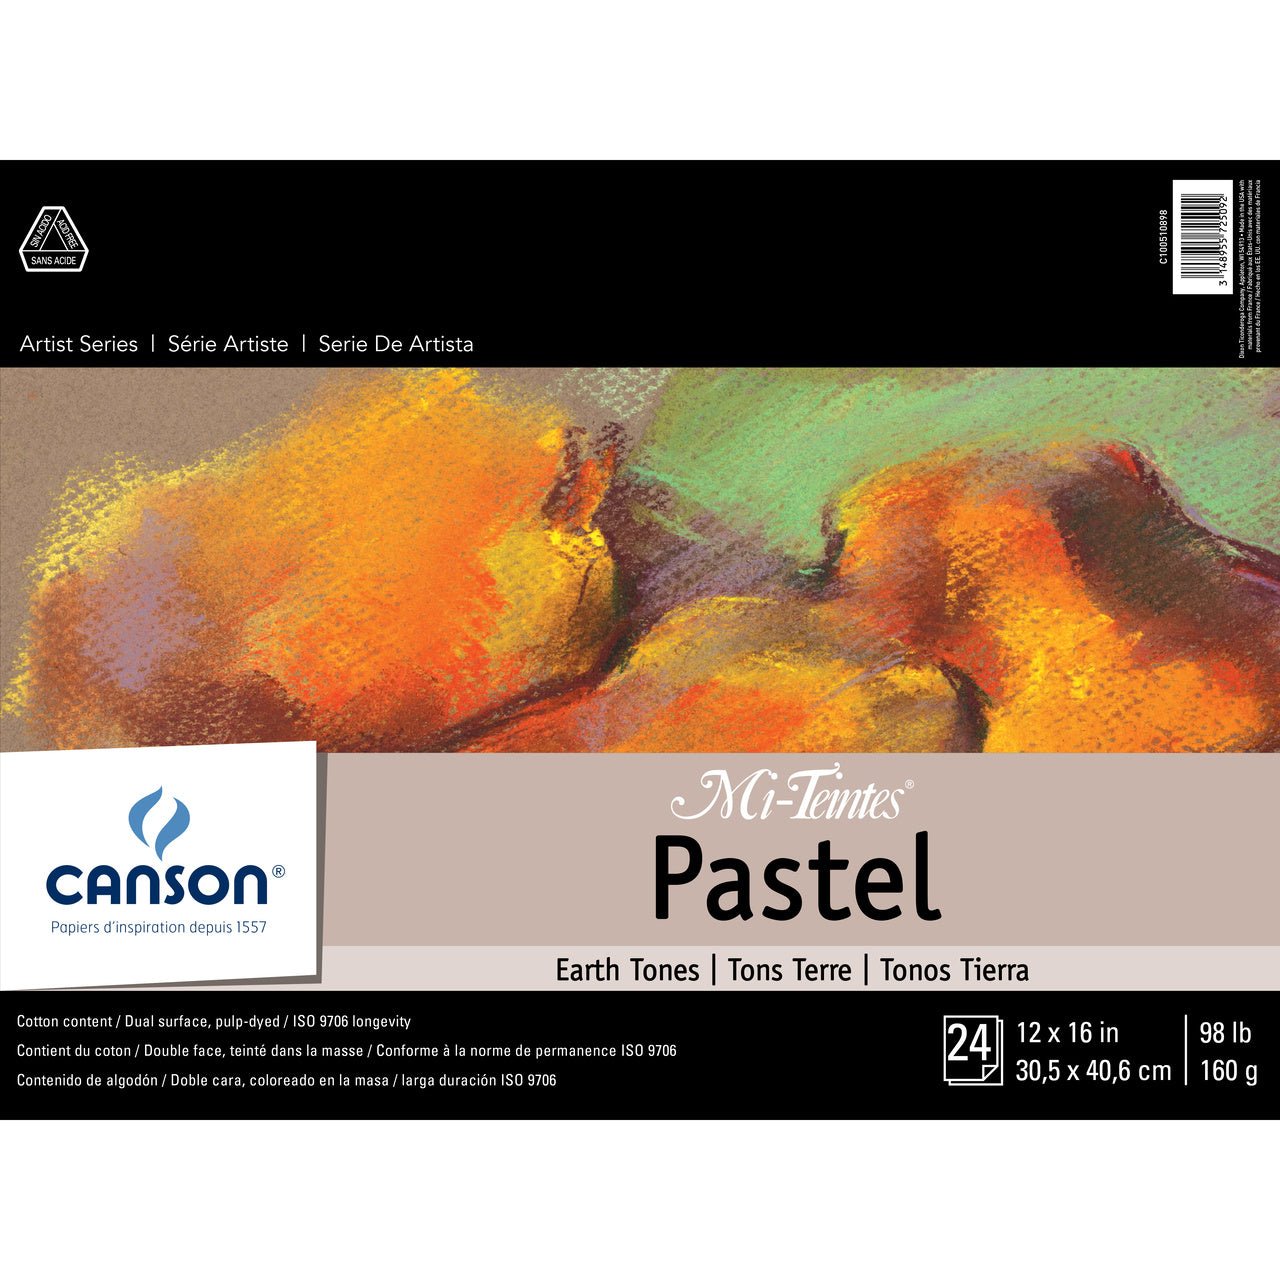 Canvas Panel Val 6-Pk 9X12 (10) - MICA Store